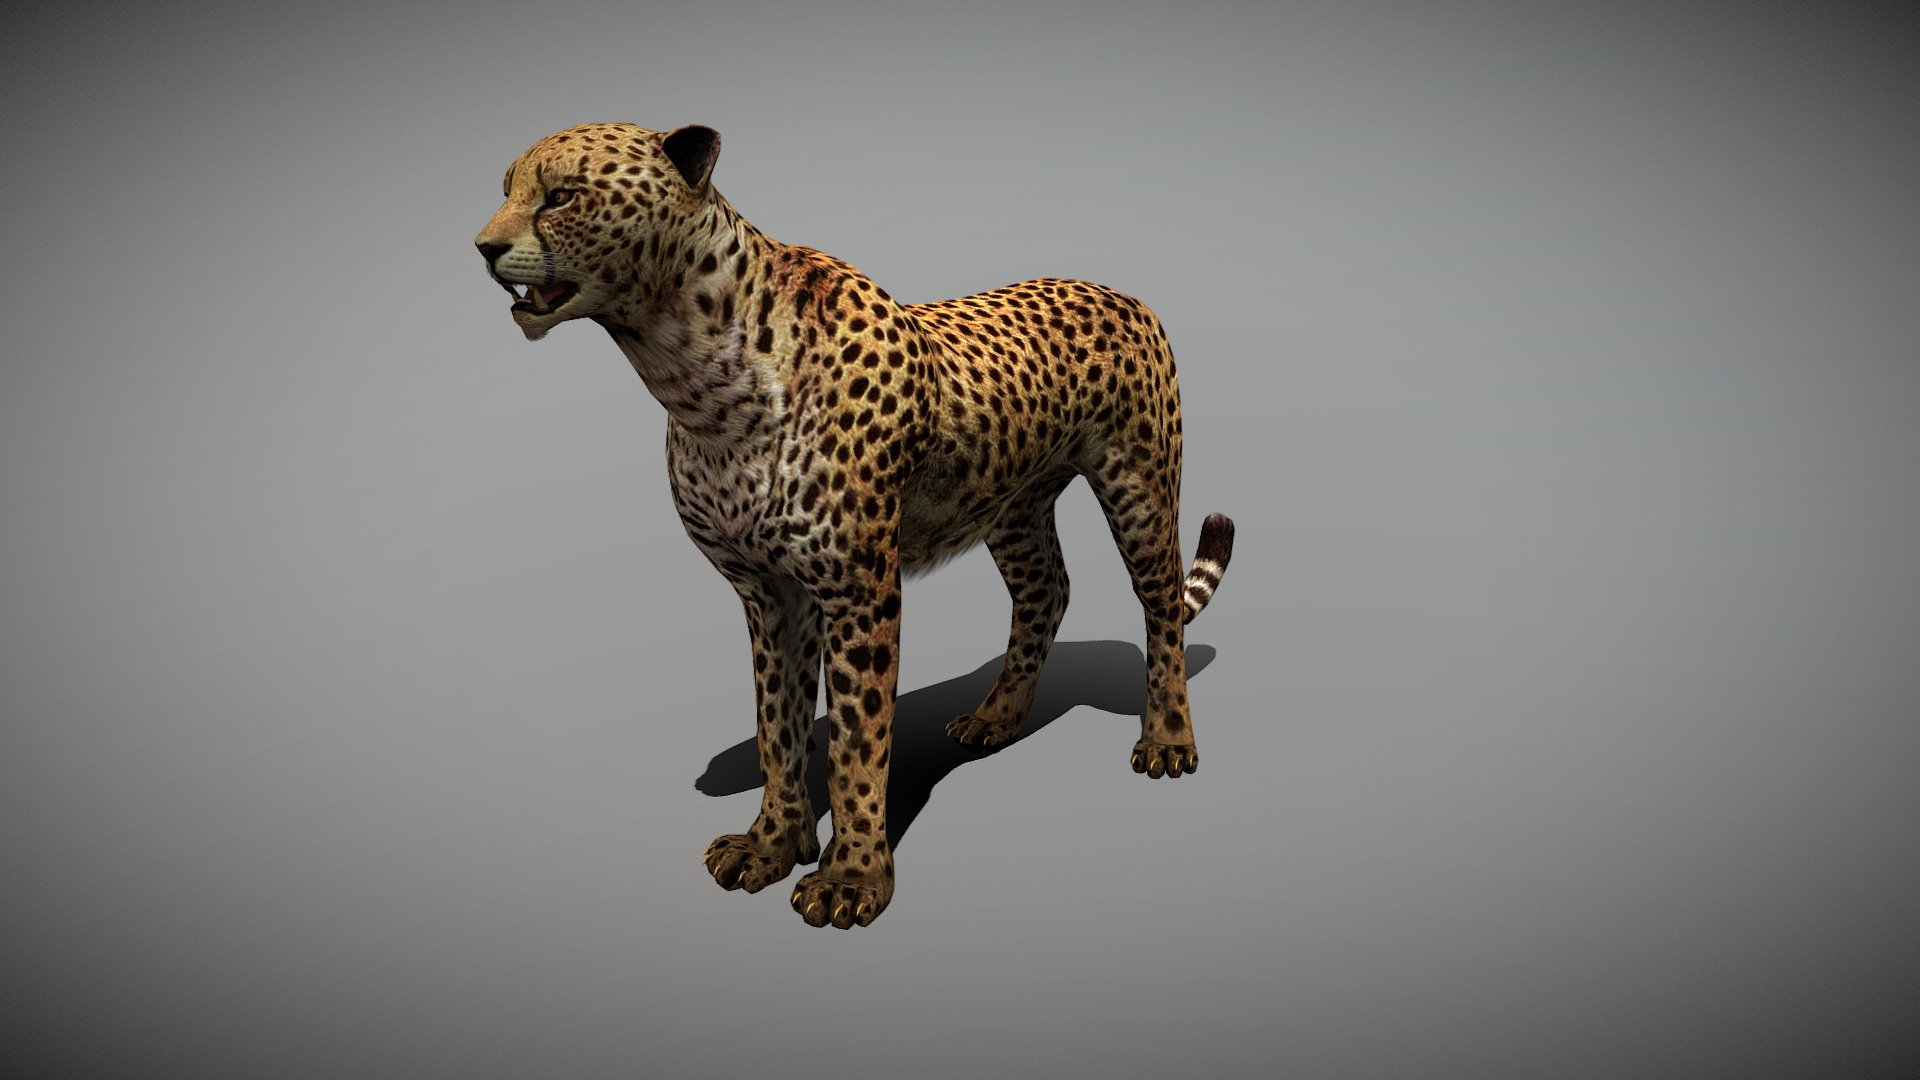 WATCH = https://youtu.be/OS6QBL5oyG8
3D Cheetah Realistic Character


PACKAGE INCLUDE



High quality model, correctly scaled for an accurate representation of the original object

High Detailed Photorealistic Cheetah, completely UVmapped and smoothable

Model is built to real-world scale.

Many different format like blender, fbx, obj, iclone, dae

Separate Loopable Animations

Ready for animation

High Quality materials and textures

Triangles = 4876

Vertices = 2605

Edges = 7445

Faces = 4876


ANIMATIONS



Idle

Sit

Walk

Run

Eat

Attack 1

Attack 2

Jump

+Many different 3d Print Poses


NOTE



GIVE CREDIT BILAL CREATION PRODUCTION

SUBSCRIBE YOUTUBE CHANNEL = https://www.youtube.com/BilalCreation/playlists

FOLLOW OUR STORE = https://sketchfab.com/bilalcreation/models

LIKE AND GIVE FEEDBACK ON THE MODEL


CONTACT US                 =  https://sites.google.com/view/bilalcreation/contact-us

ORDER  DONATION   =  https://sites.google.com/view/bilalcreation/order - CHEETAH ANIMATED - Buy Royalty Free 3D model by Bilal Creation Production (@bilalcreation) 3d model